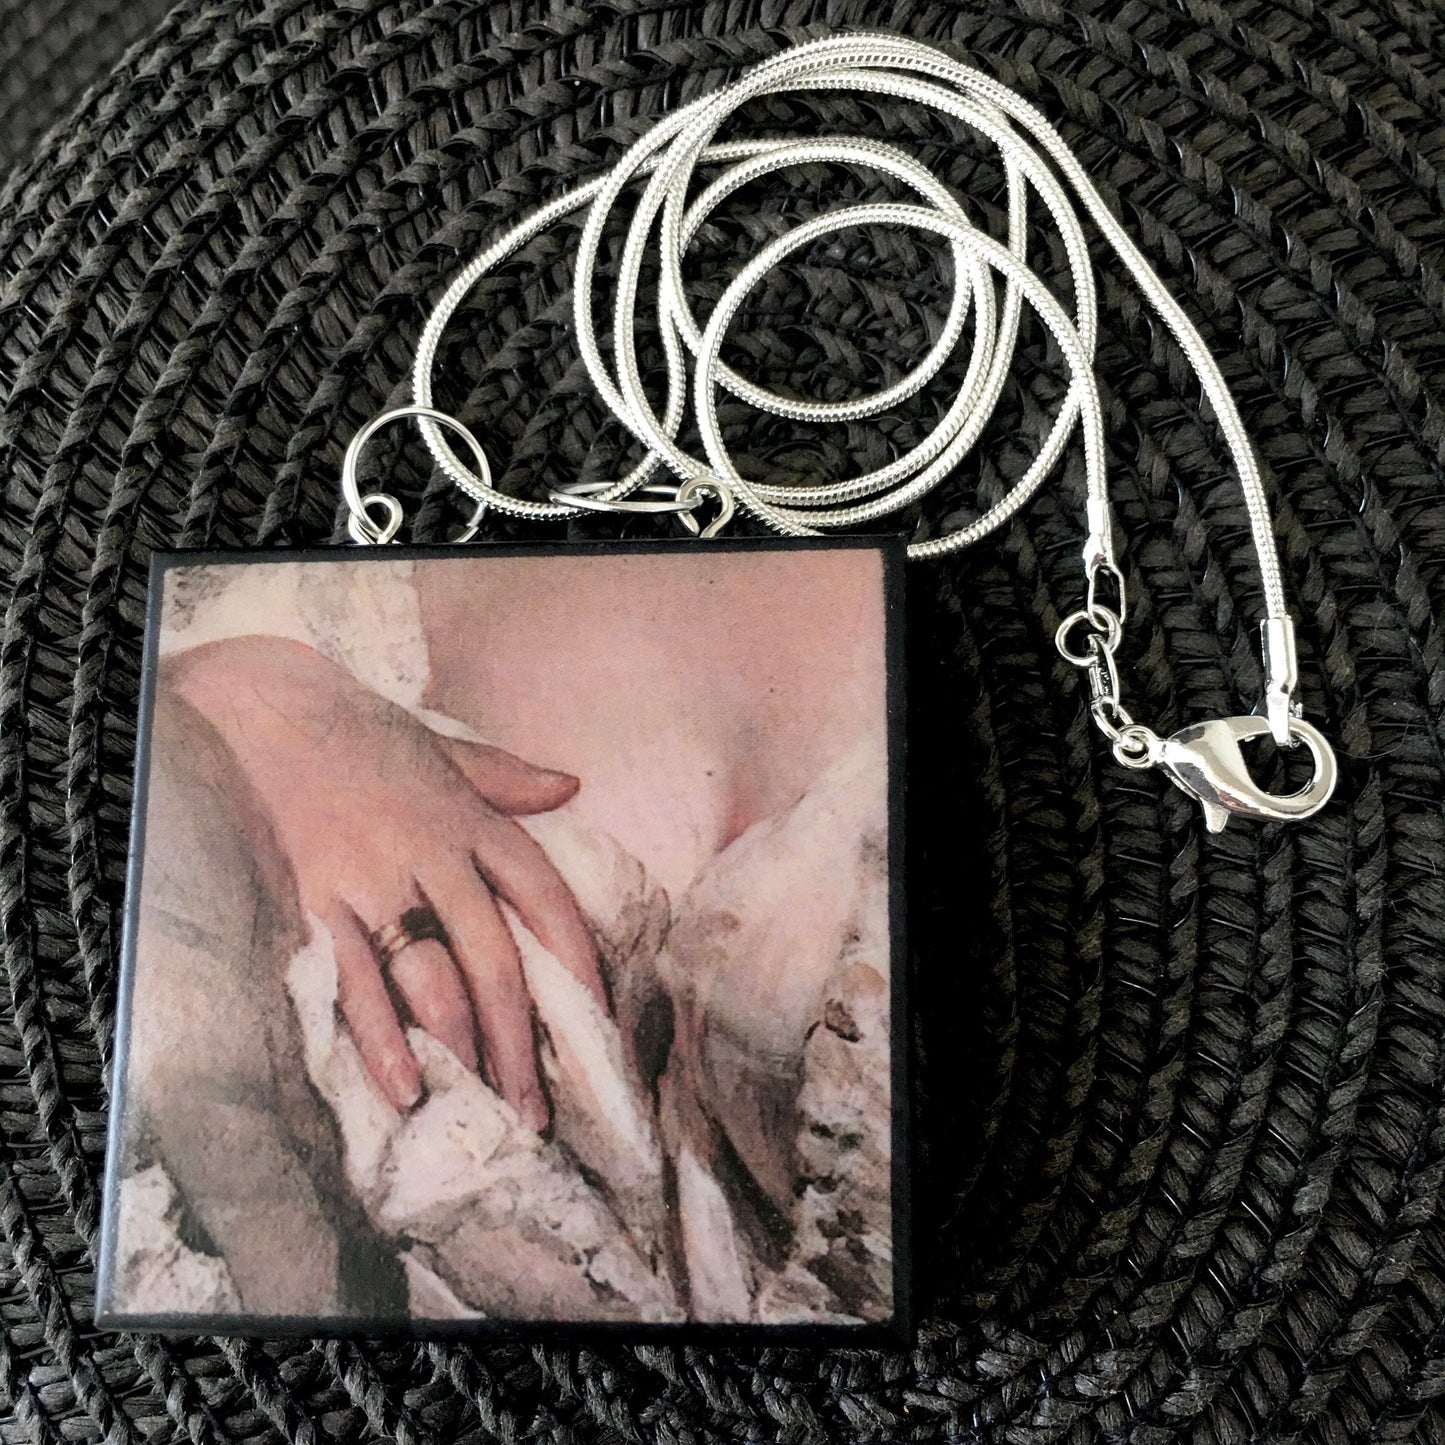 Statement necklace sterling silver chain with a wooden squared pendant inspired by a sensual art detail of a hand. quirky gift on obljewellery shop.